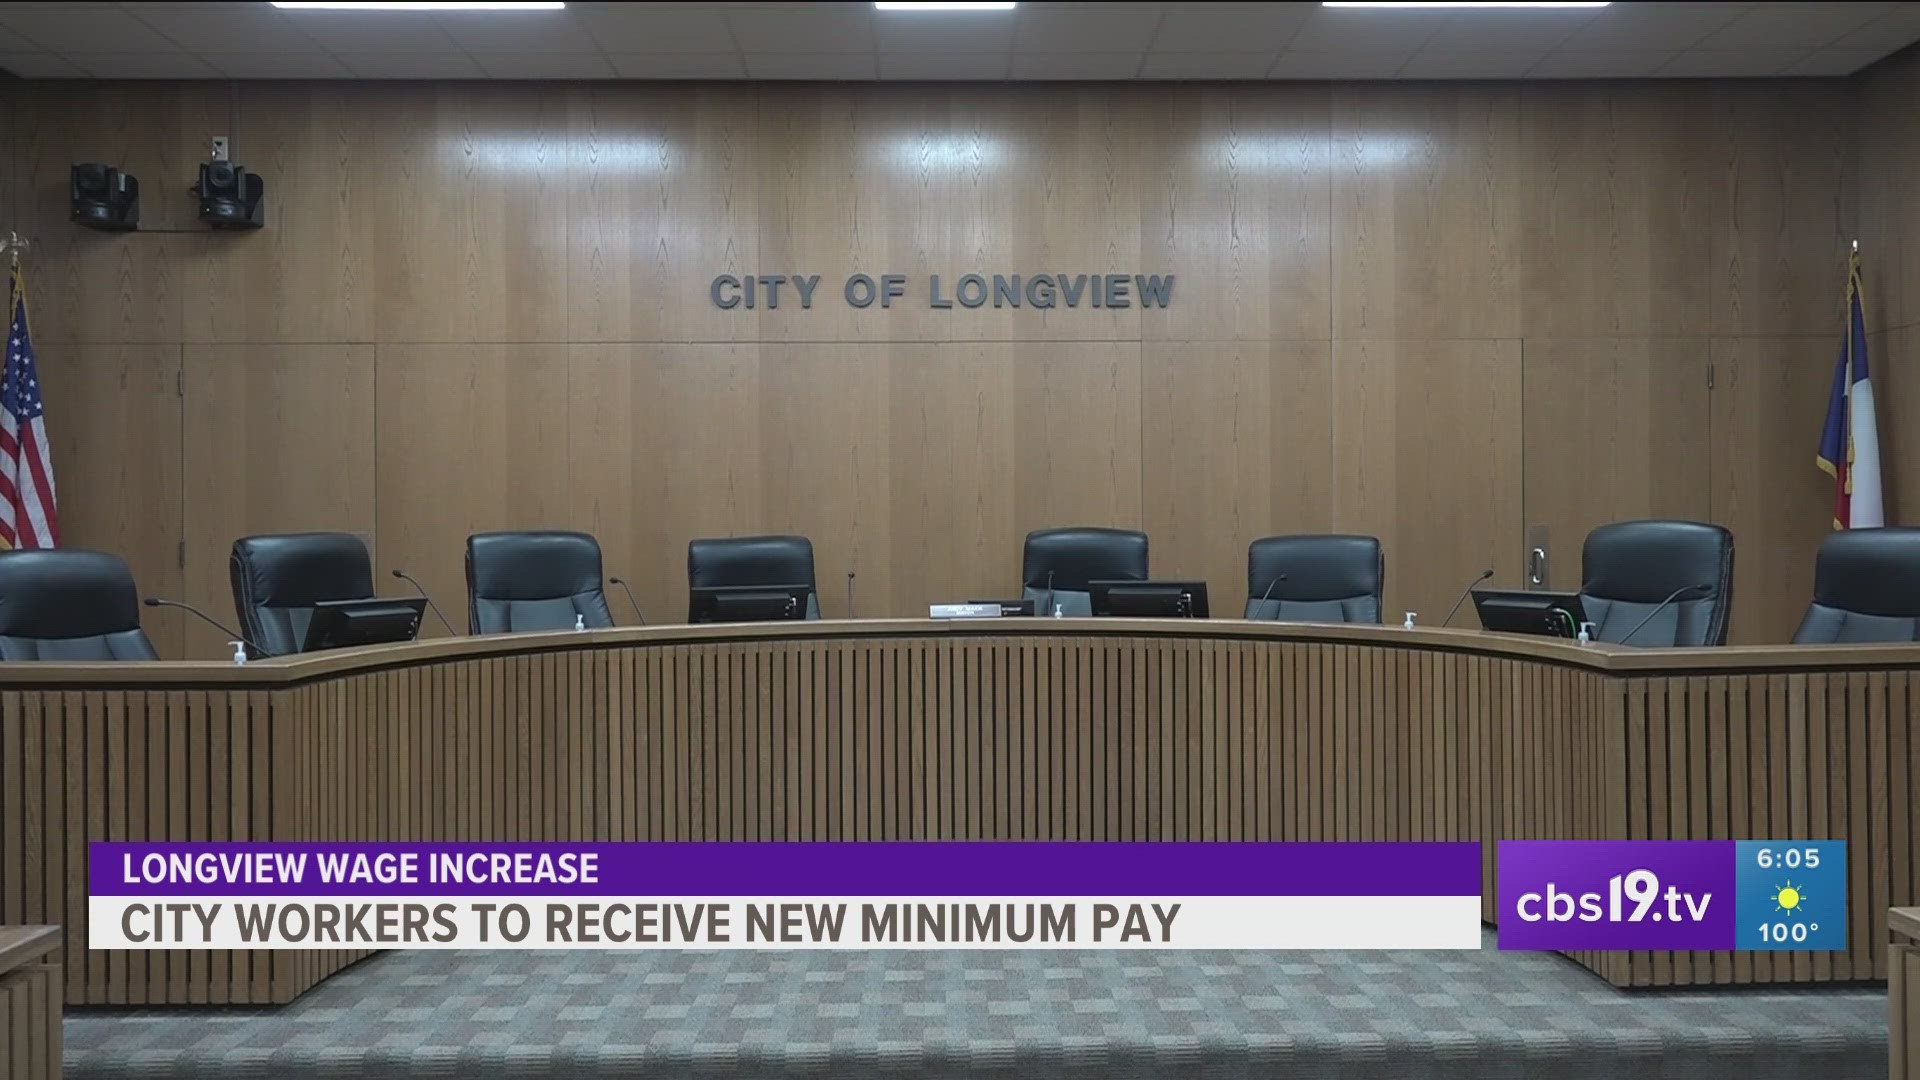 A new city budget proposal aims to raise the city’s minimum pay to 15 dollars per hour.